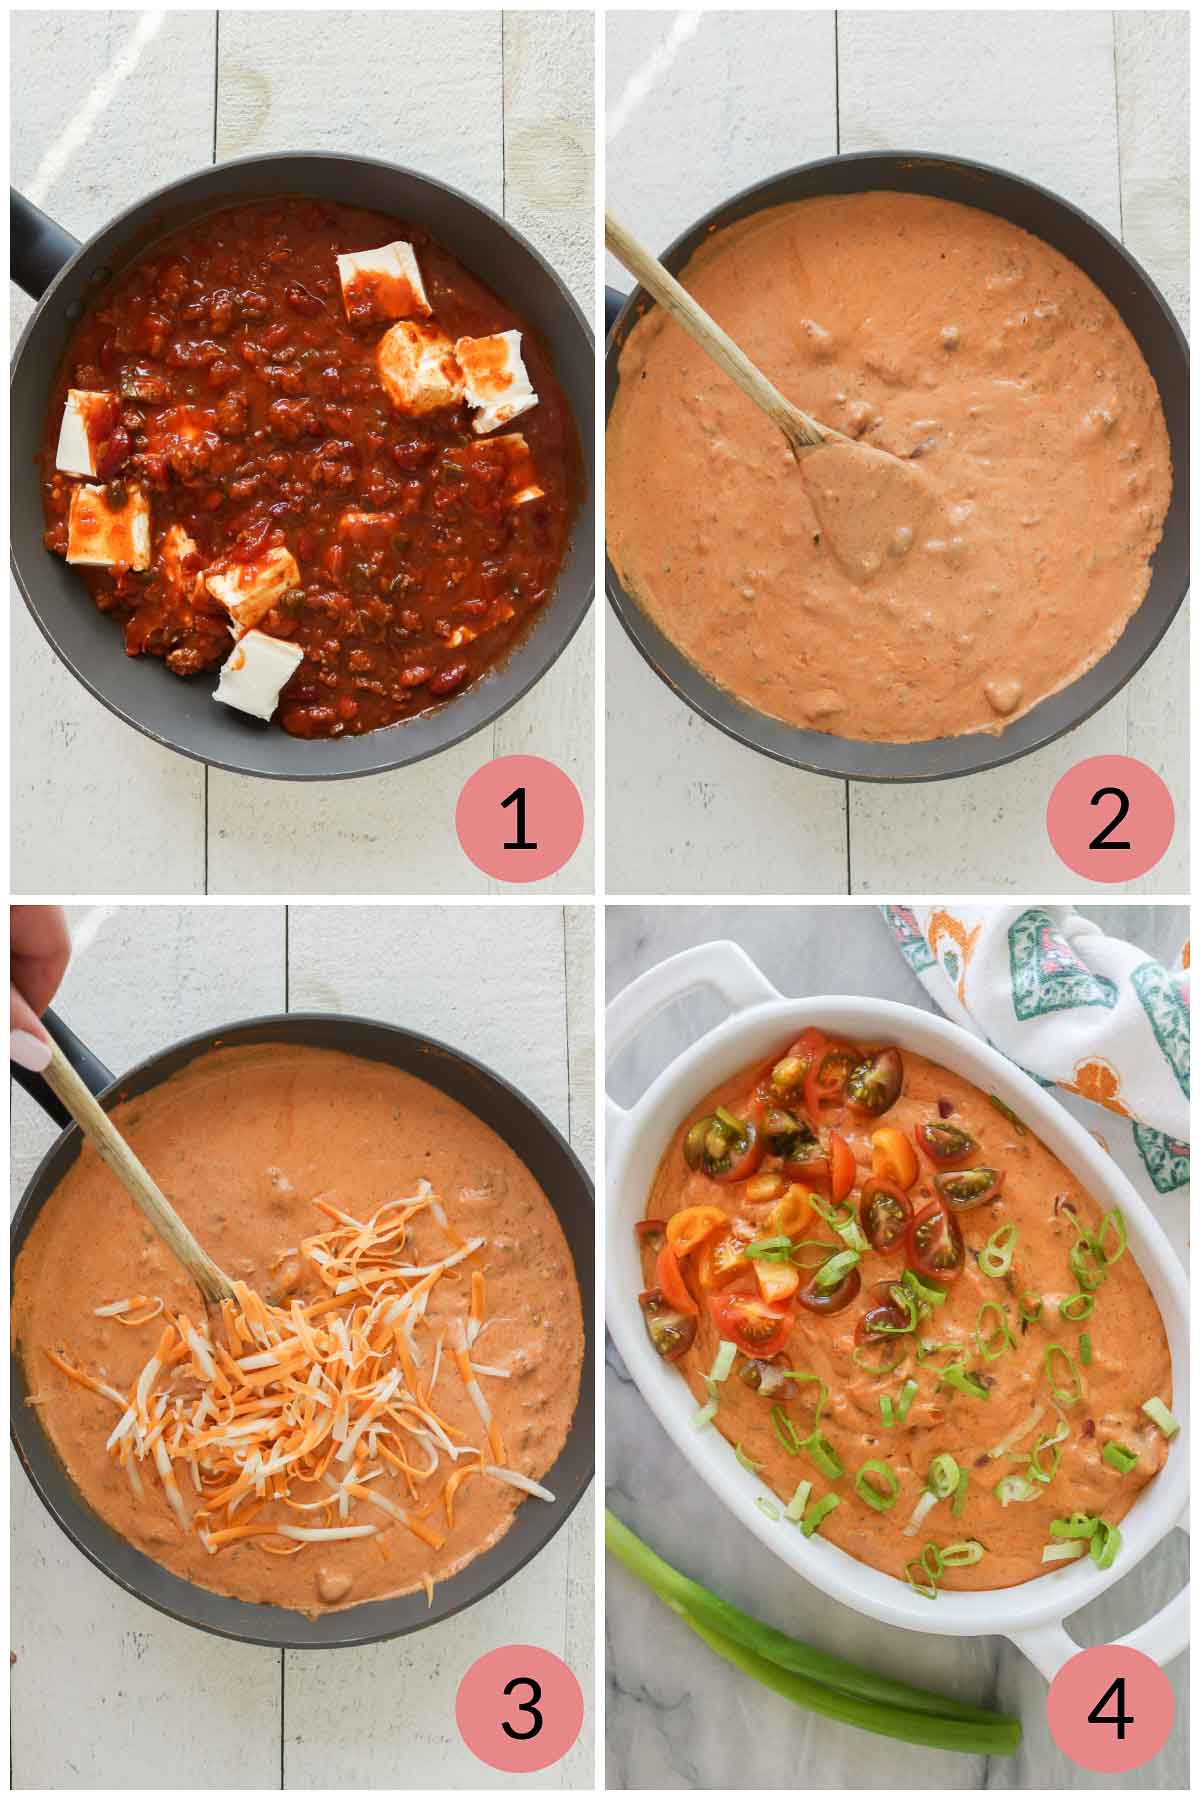 Collage of steps to make chili cream cheese dip.